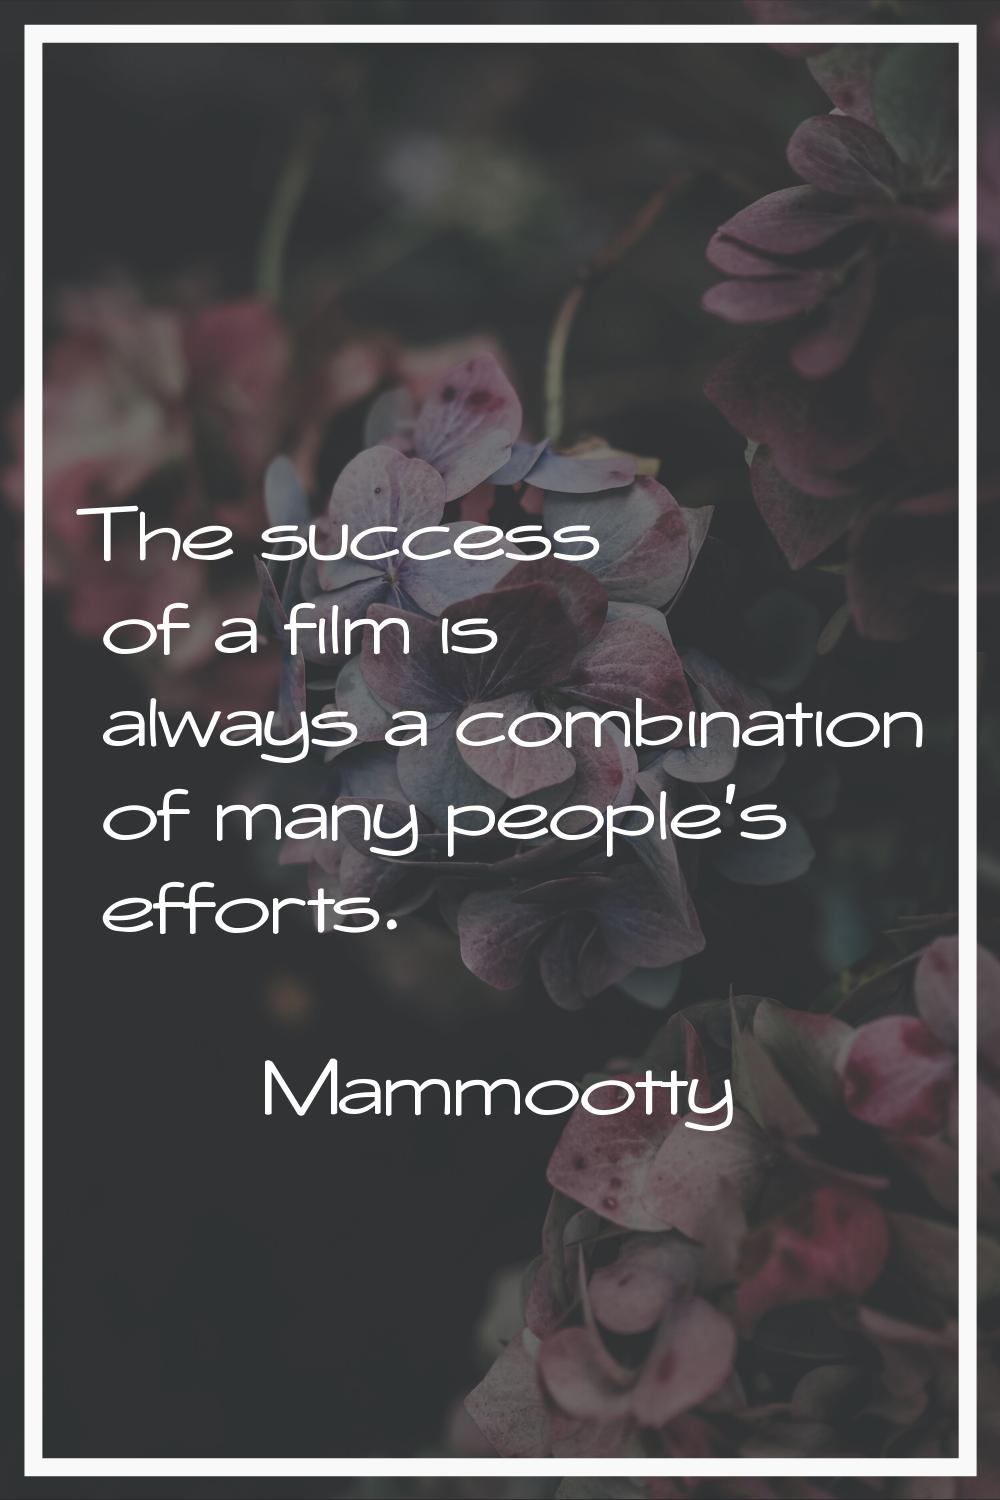 The success of a film is always a combination of many people's efforts.